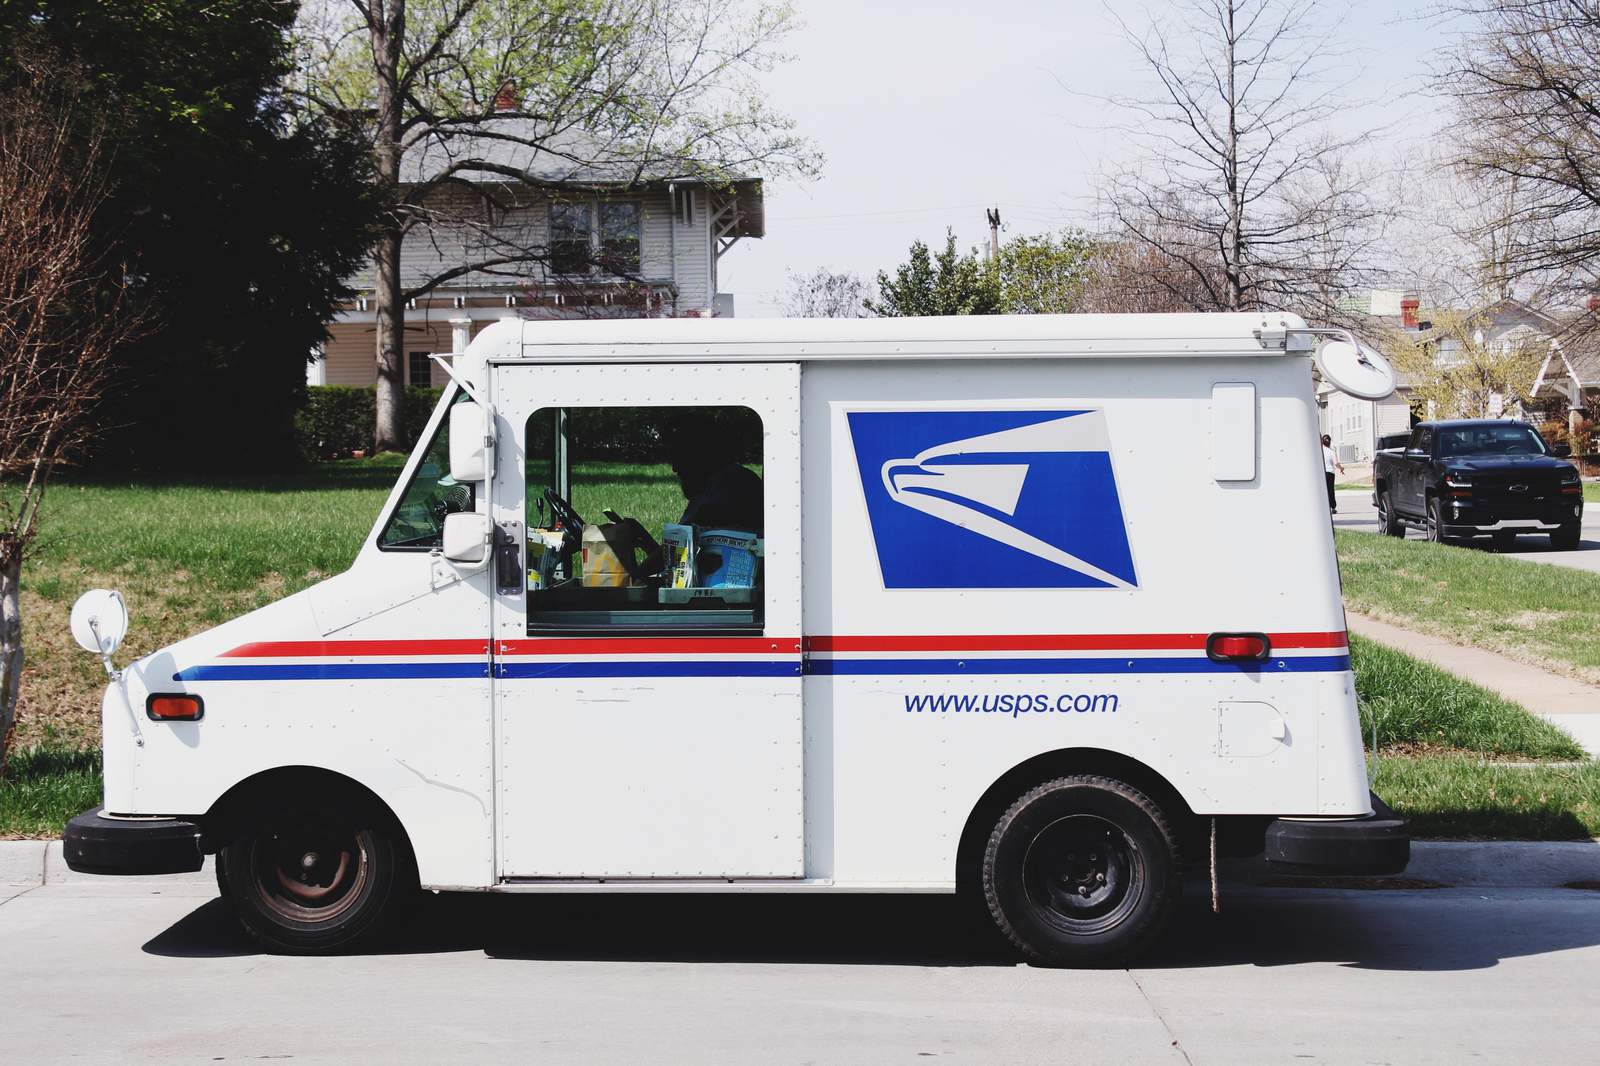 Mail carrier delivers his own celebration to the 2020 graduates on his route